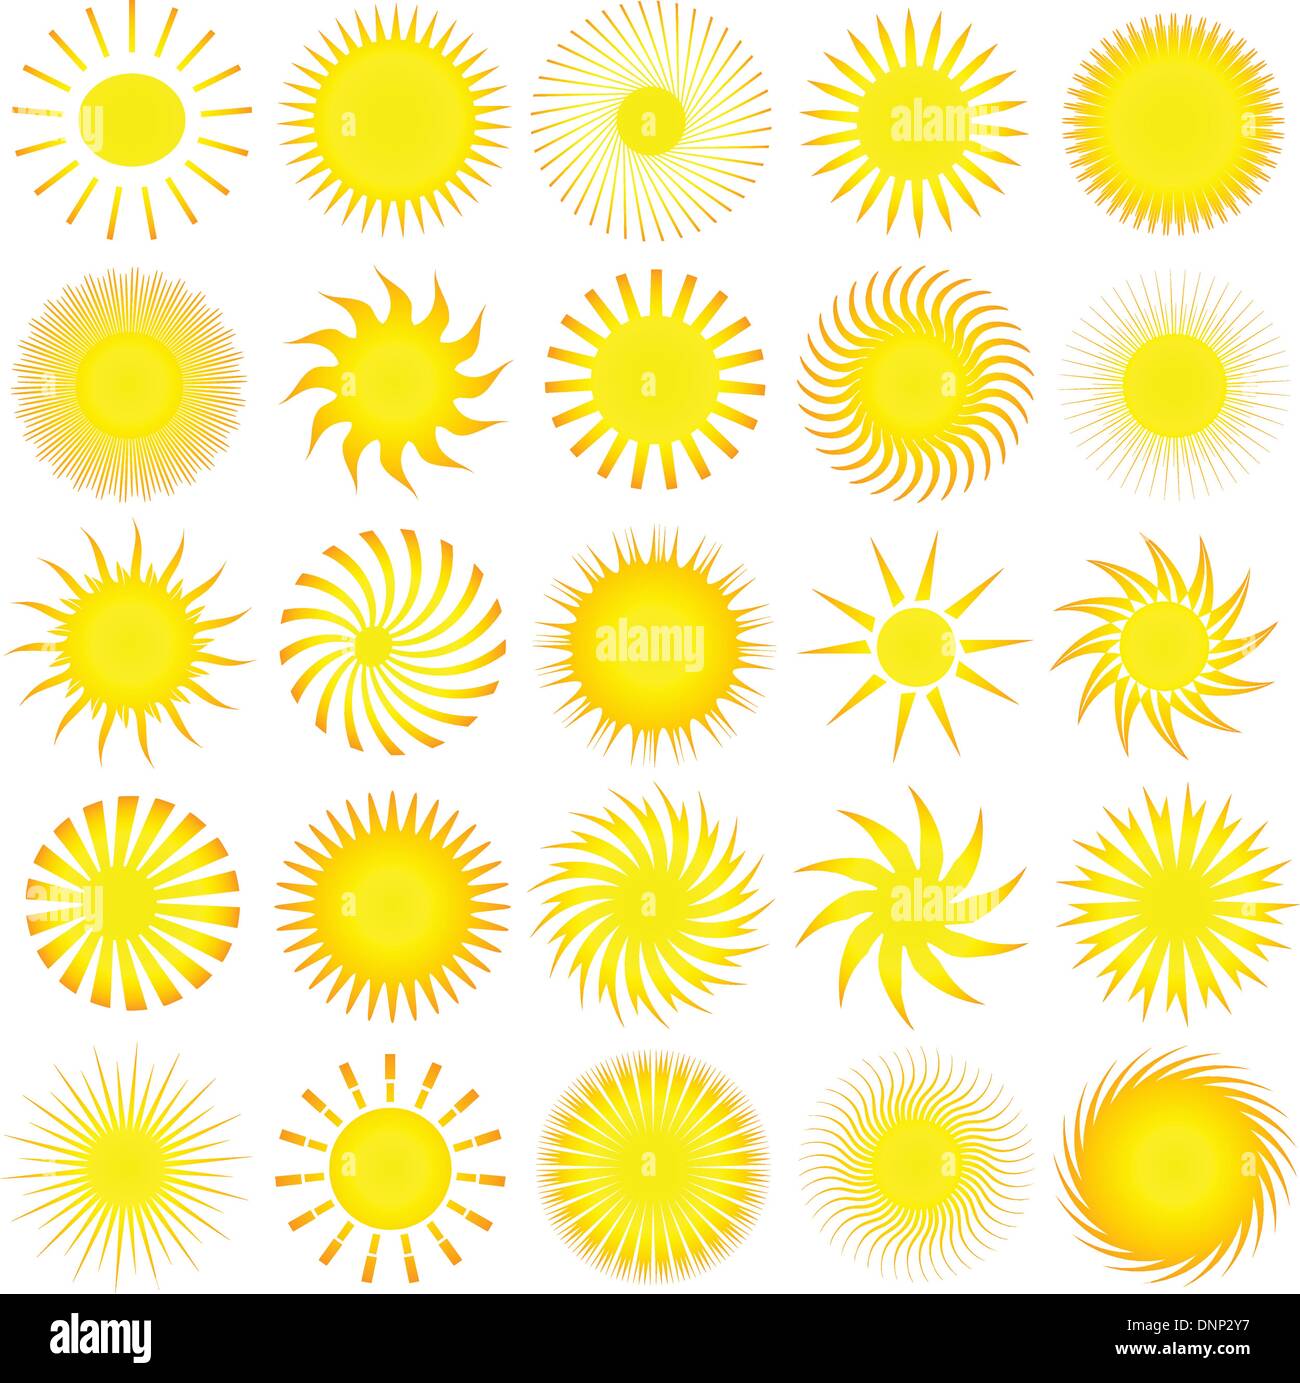 Lots of different sun icons Stock Vector